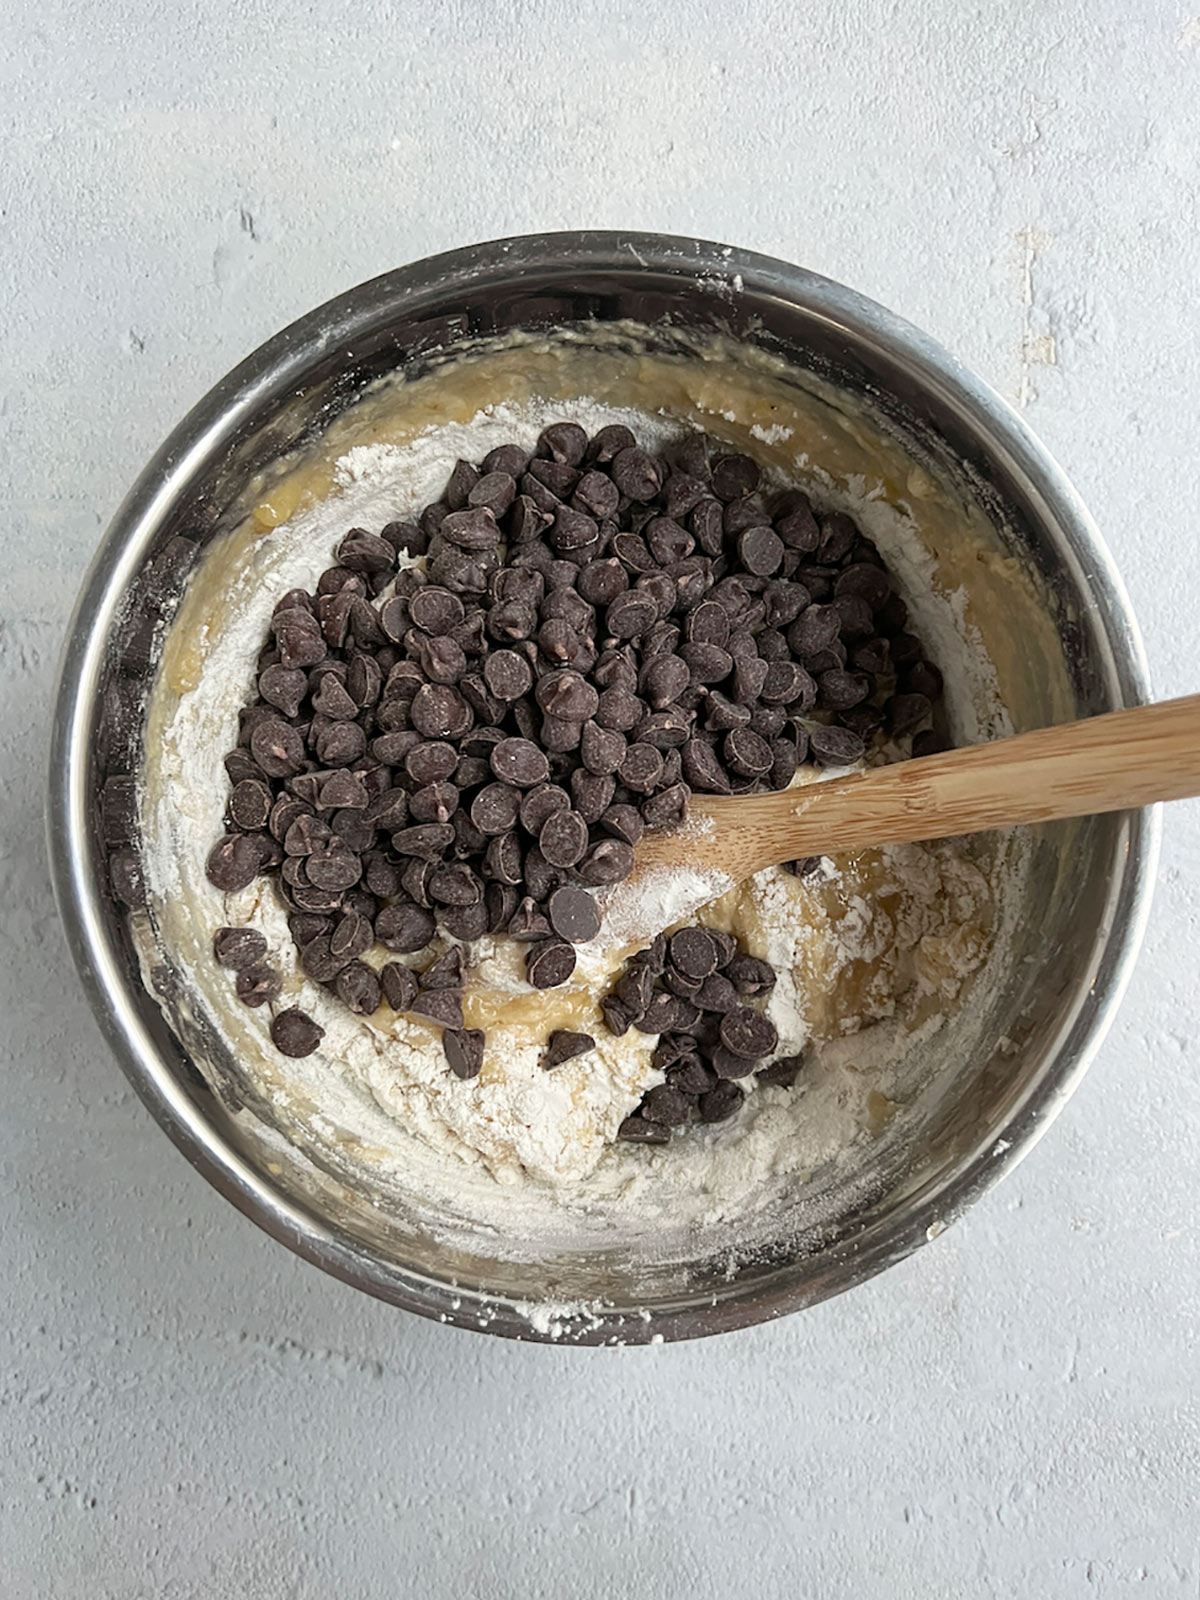 Adding chocolate chips to banana bread batter.